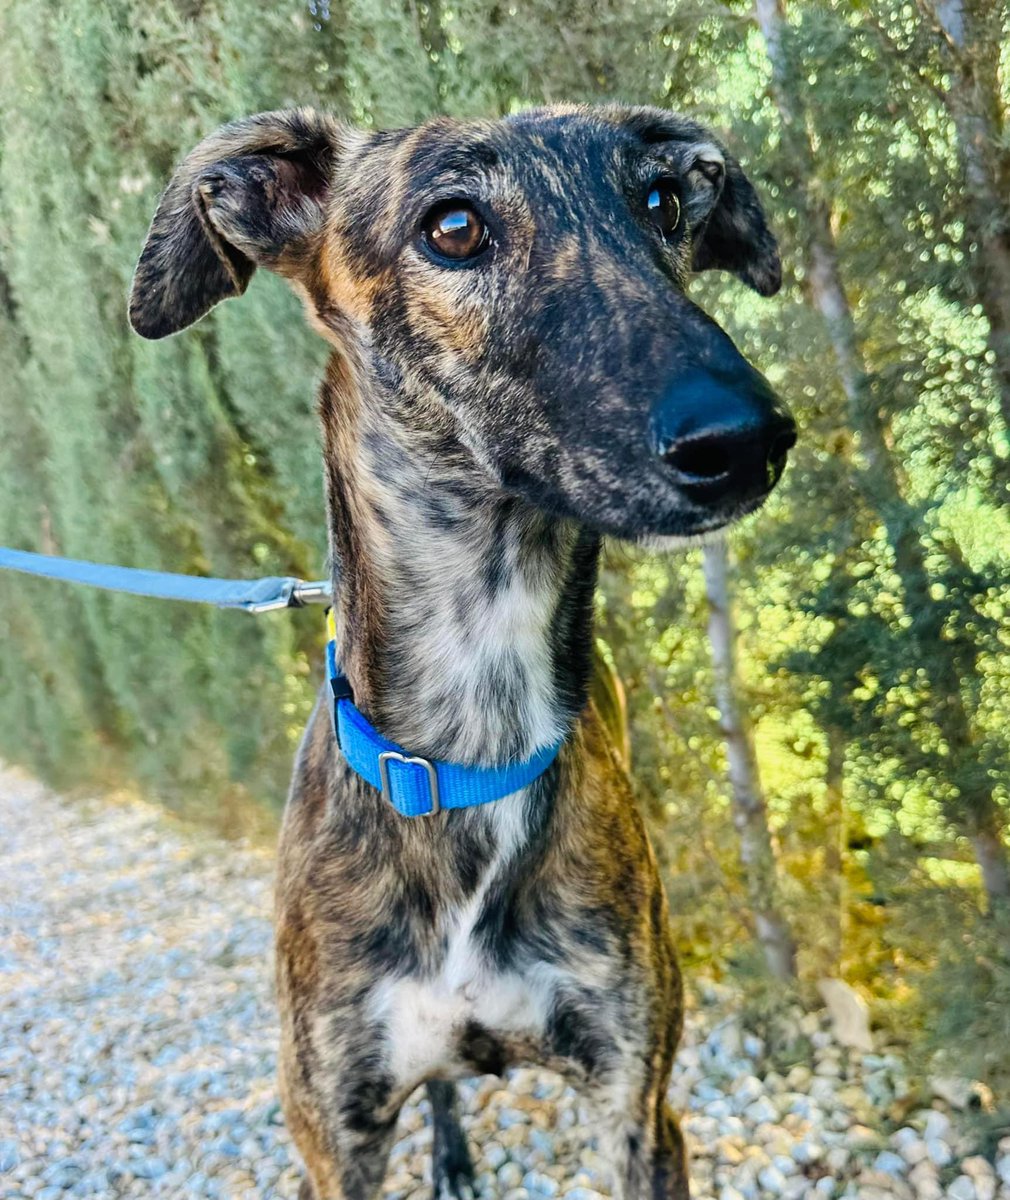 Meet Rosa 🌹 Rosa came from another protectora as they struggle to find homes for Galgos. She’s approx 6mths old & is an absolute darling. Let’s hope she doesn’t have to wait too long. Will you give Rosa a share? 🙏🏻 She’s beautiful isn’t she? 😍 galgosdelsol.org/adoptables